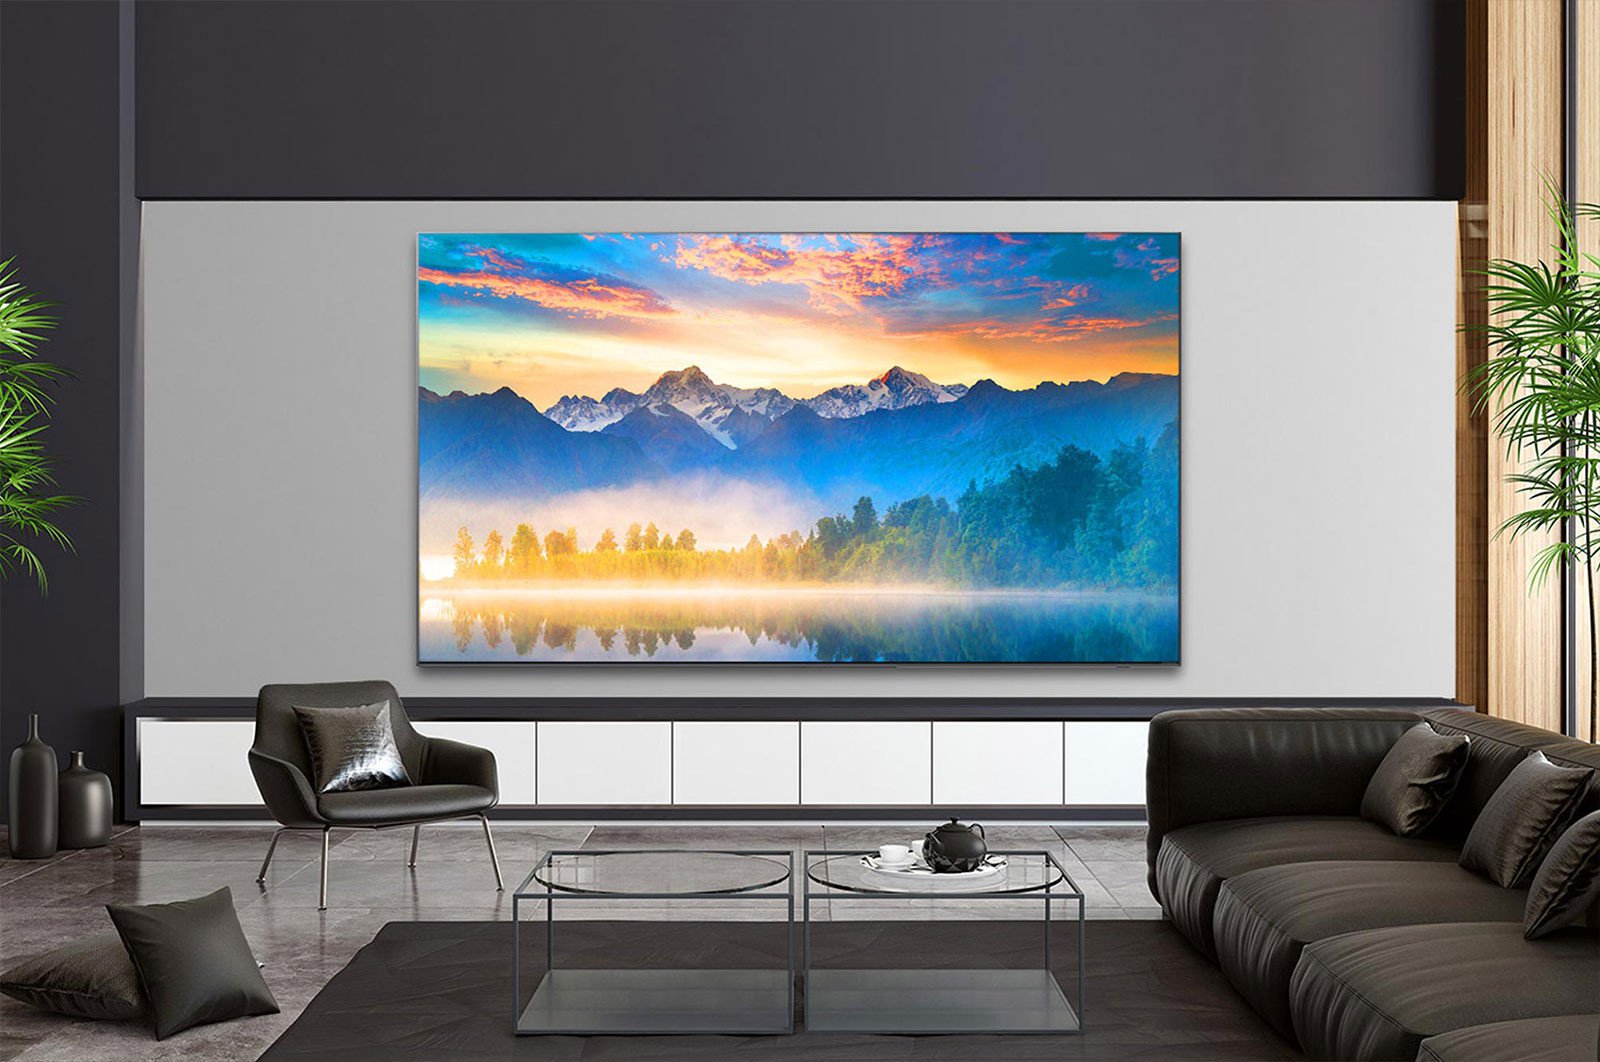 Post Banner for LG Wins Four 2020-2021 EISA Awards for Its Home Entertainment Products, Including the GX OLED and the 8K NanoCell TVs